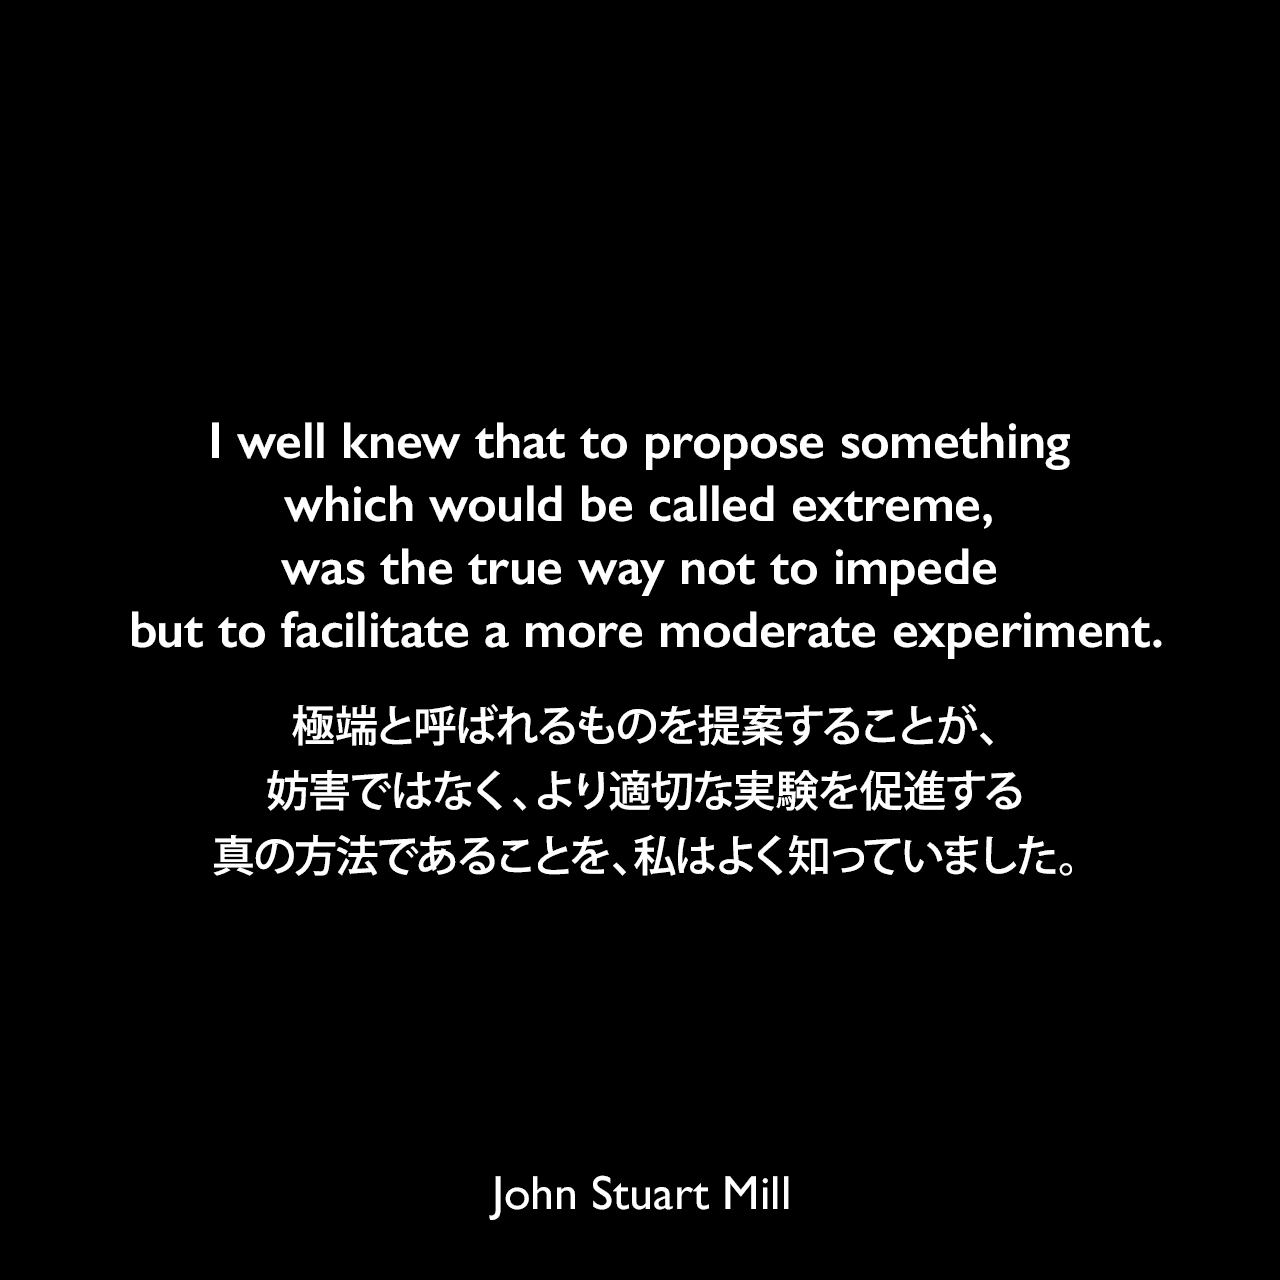 I well knew that to propose something which would be called extreme, was the true way not to impede but to facilitate a more moderate experiment.極端と呼ばれるものを提案することが、妨害ではなく、より適切な実験を促進する真の方法であることを、私はよく知っていました。- ジョン・スチュアート・ミルの自伝よりJohn Stuart Mill